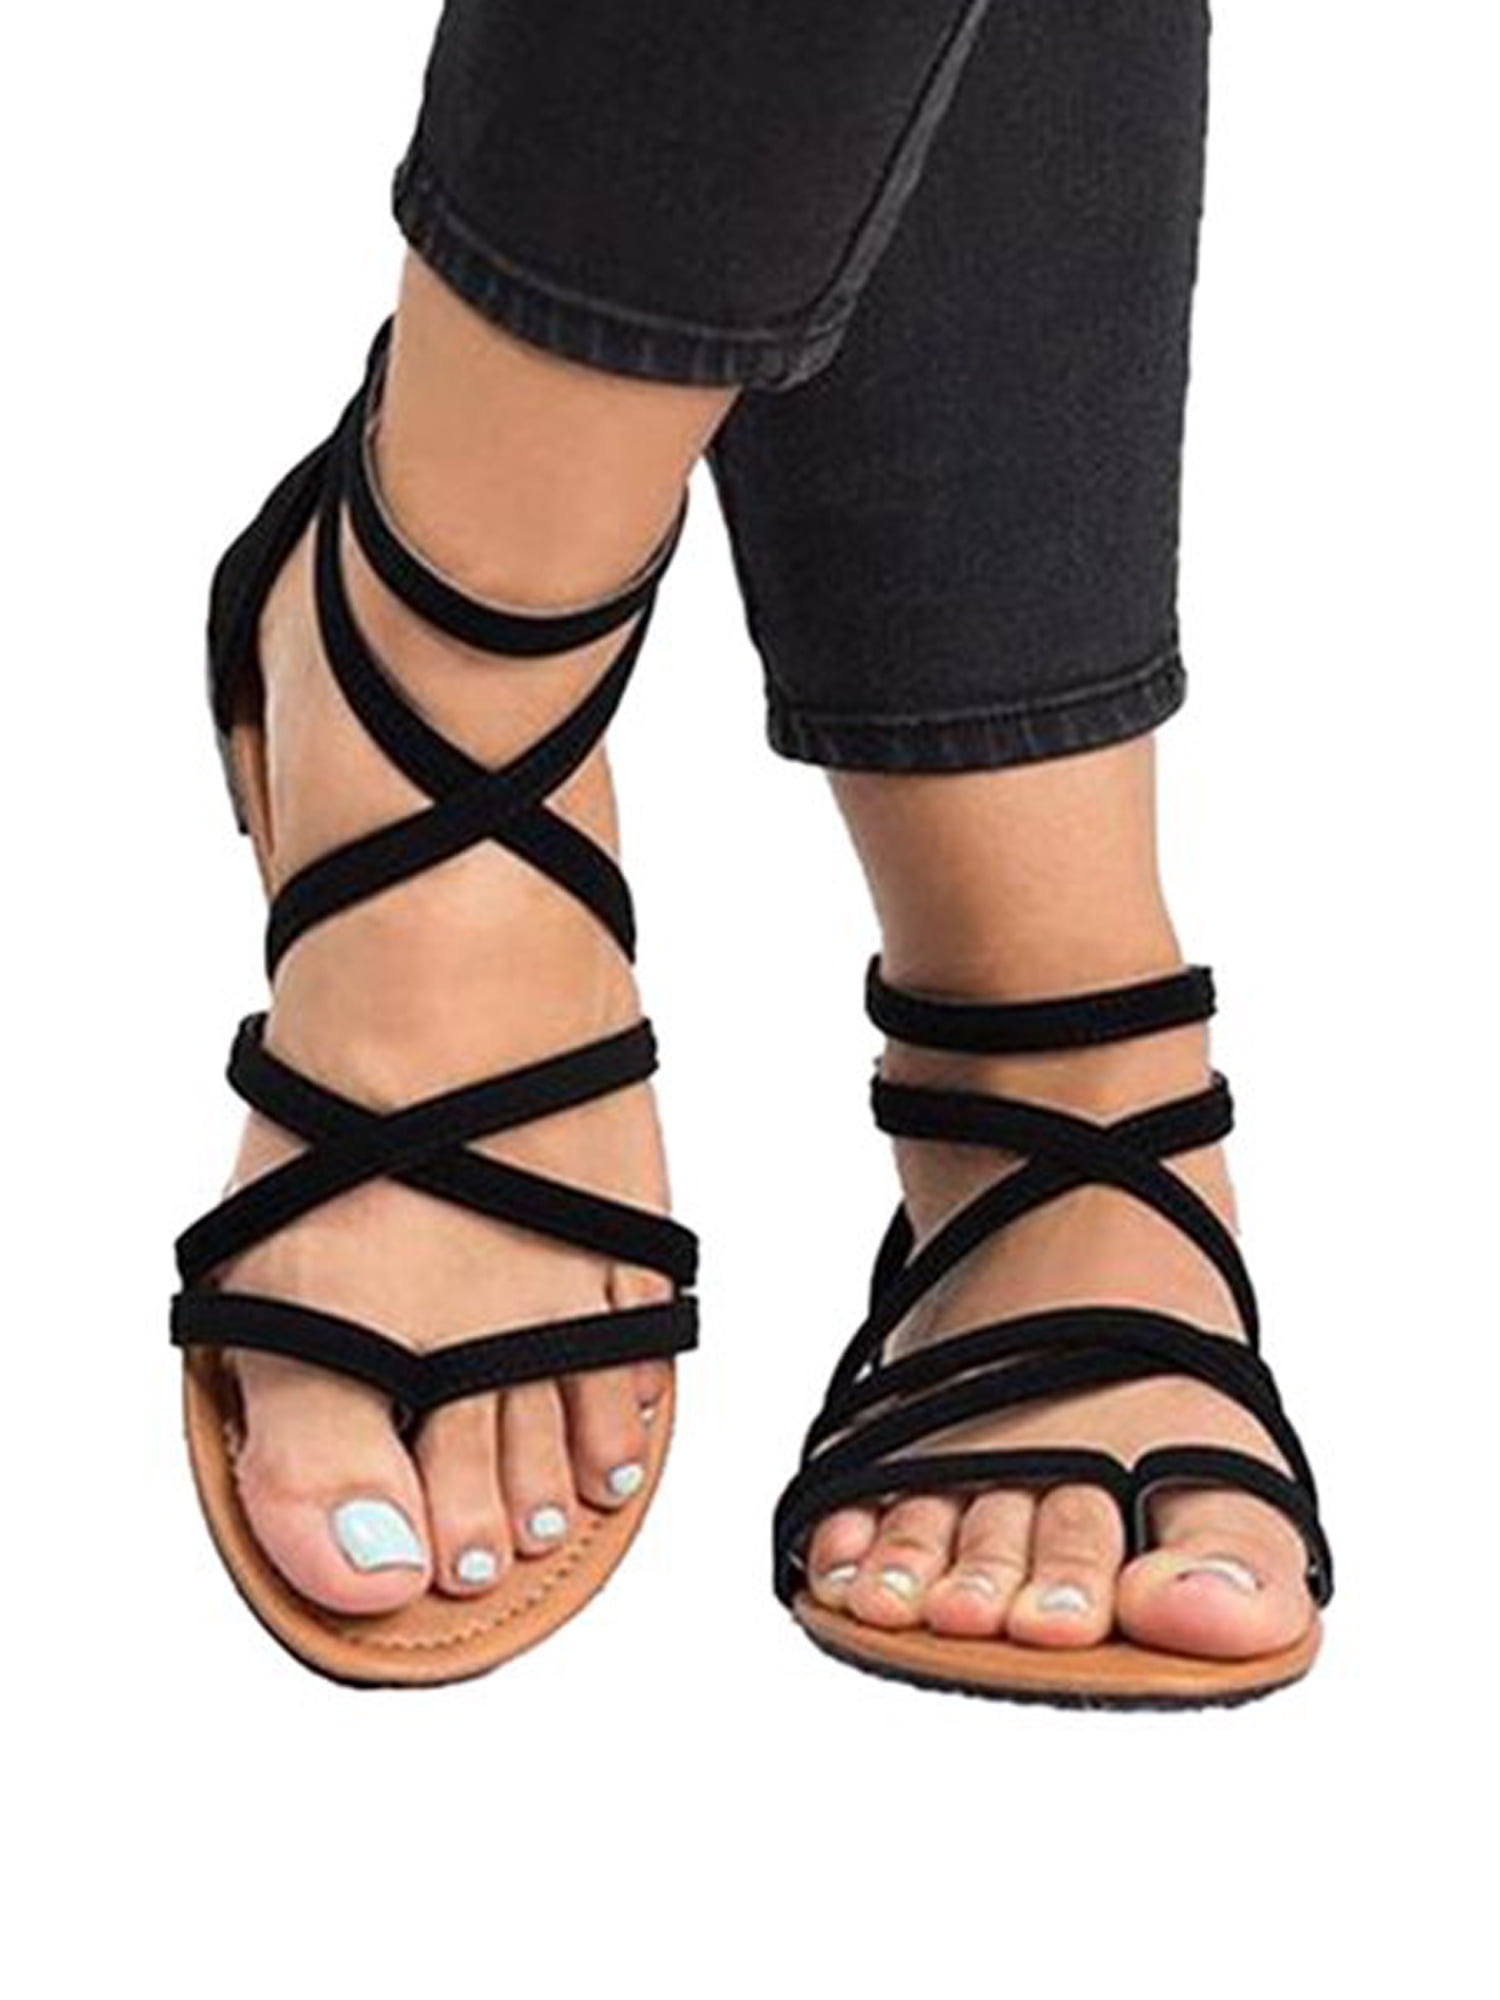 Lace Up Flat Sandals for Women Open Toe Criss Cross Strappy Flat Heels Dress Sandals Womens Fashion Classic Suede Comfort Soft Soled Summer Sandals Ladies Party Beach Travel Flip Flops 